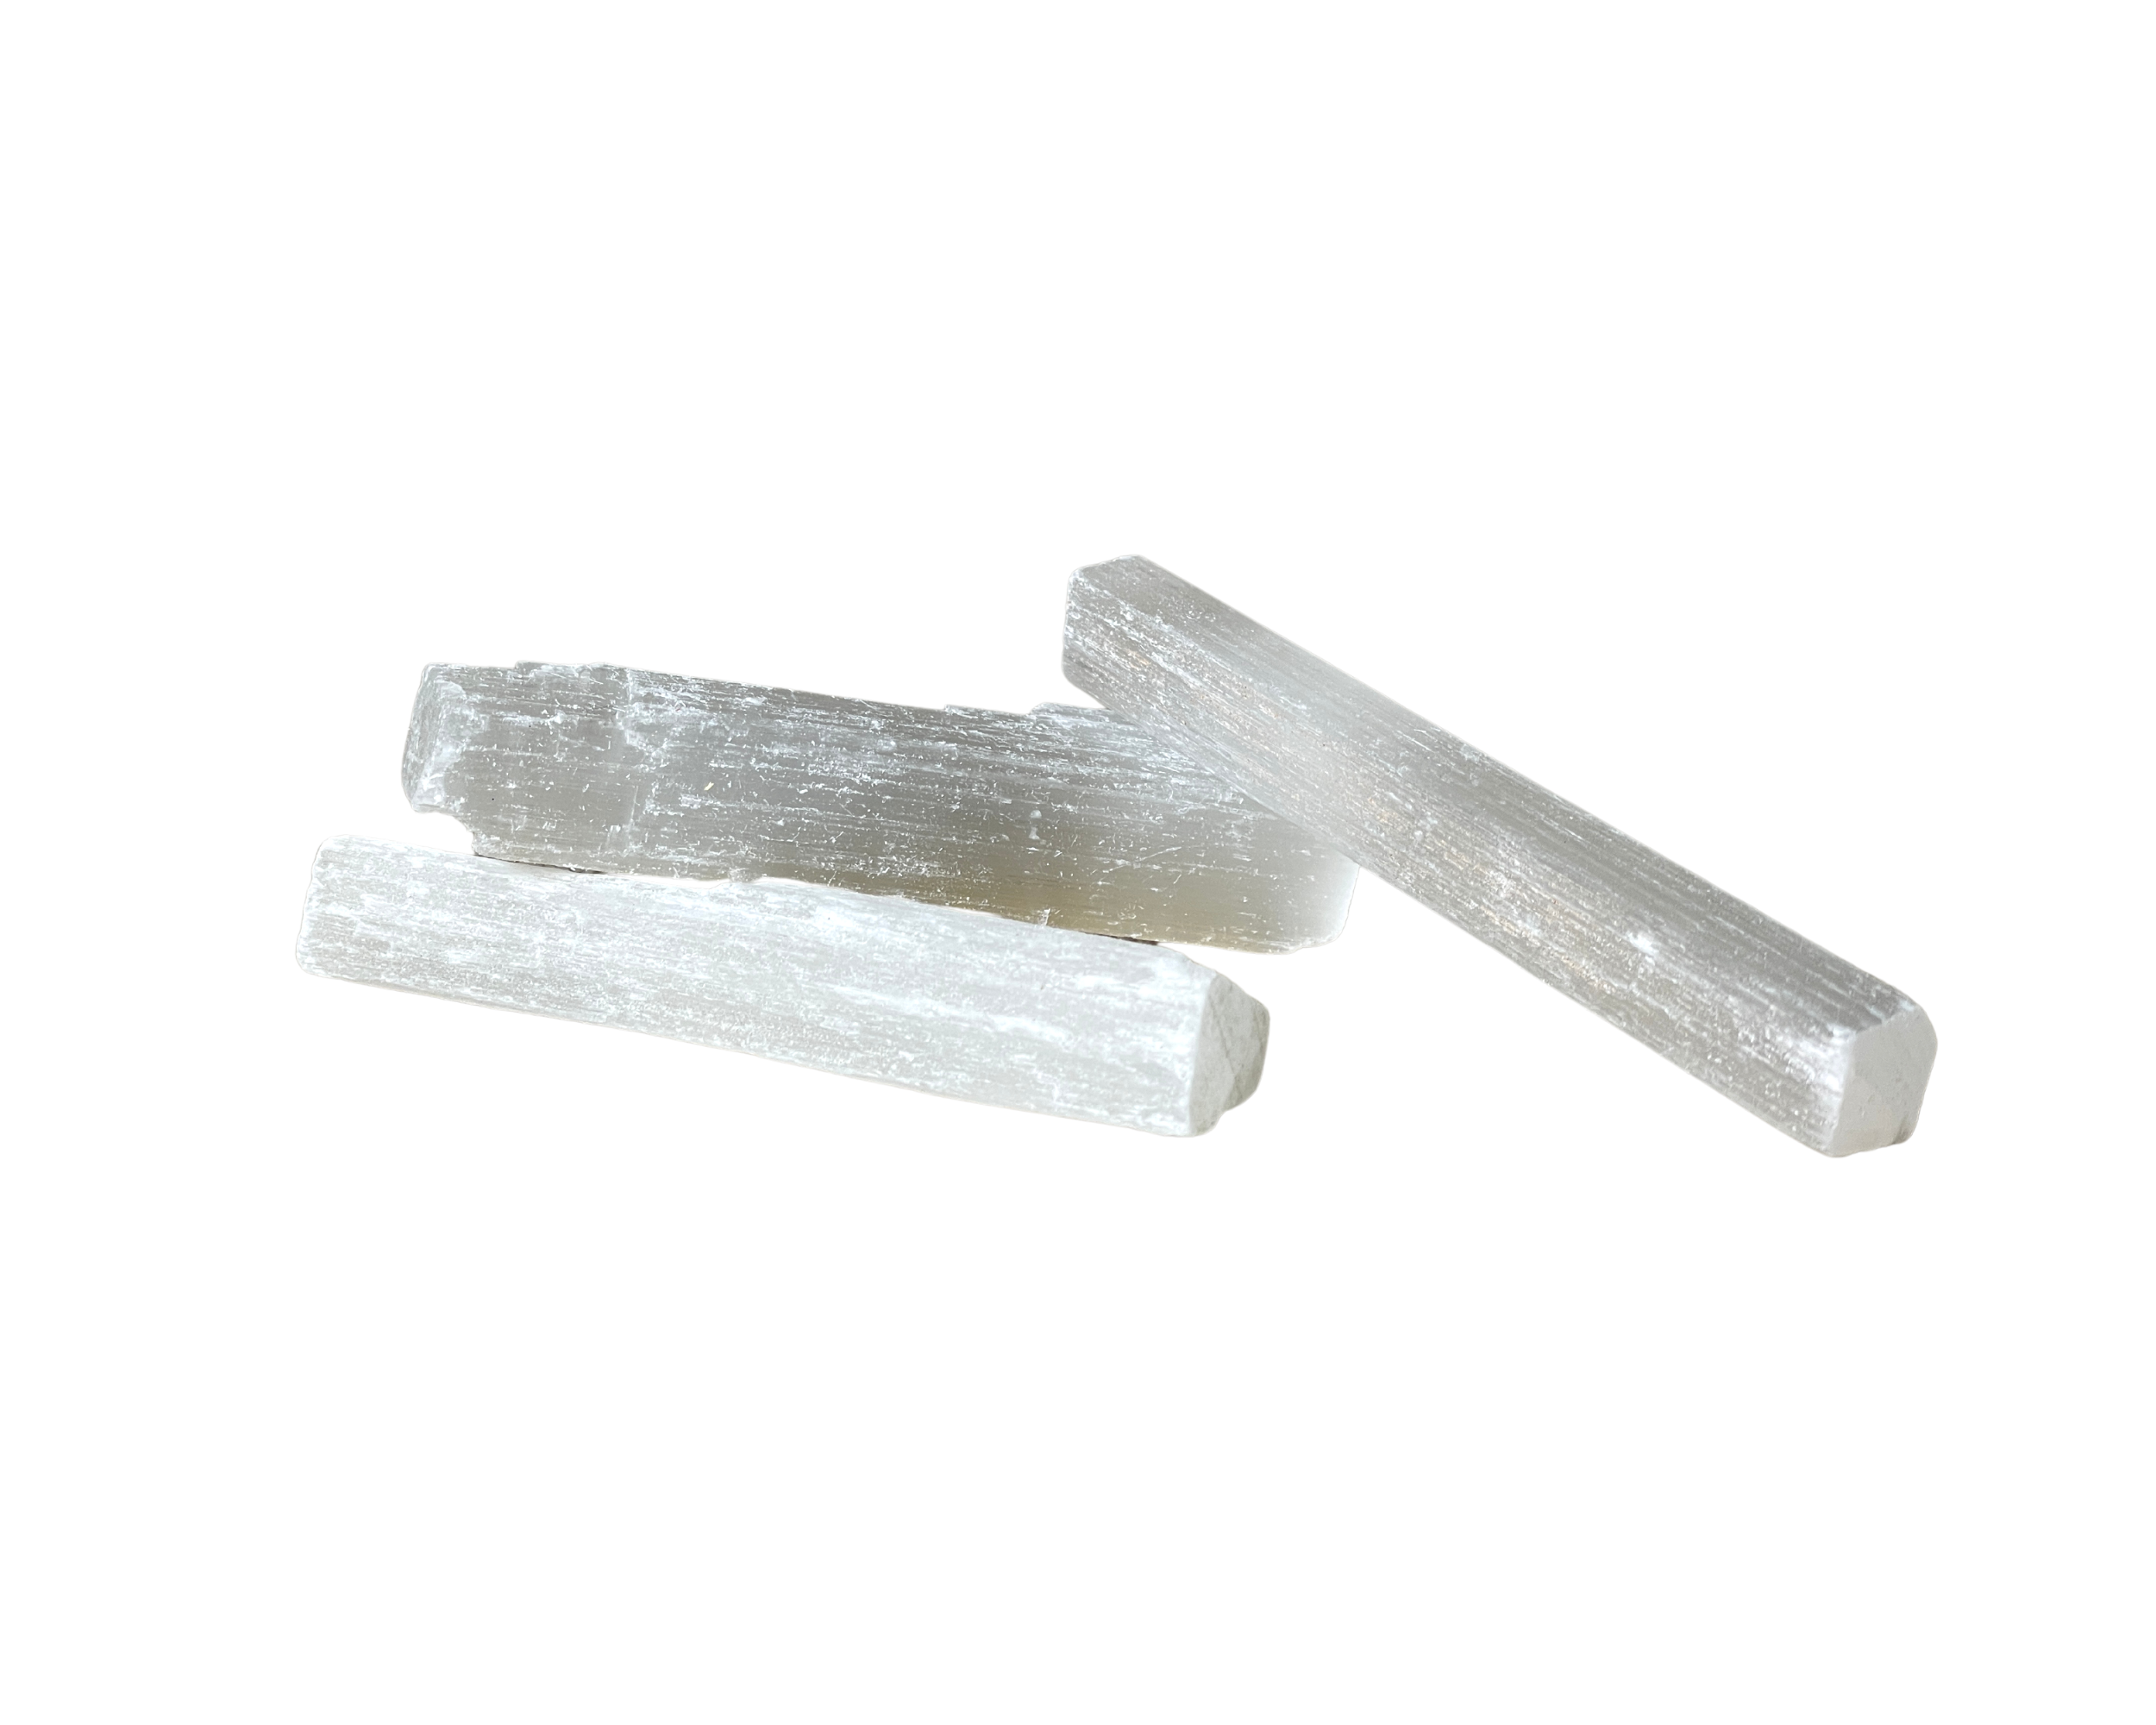 Buy Online Latest and Unique Selenite Crystal Wand (Rectangular) 2.5"-4" | Shop Best Spiritual Items - The Mystical Ritual